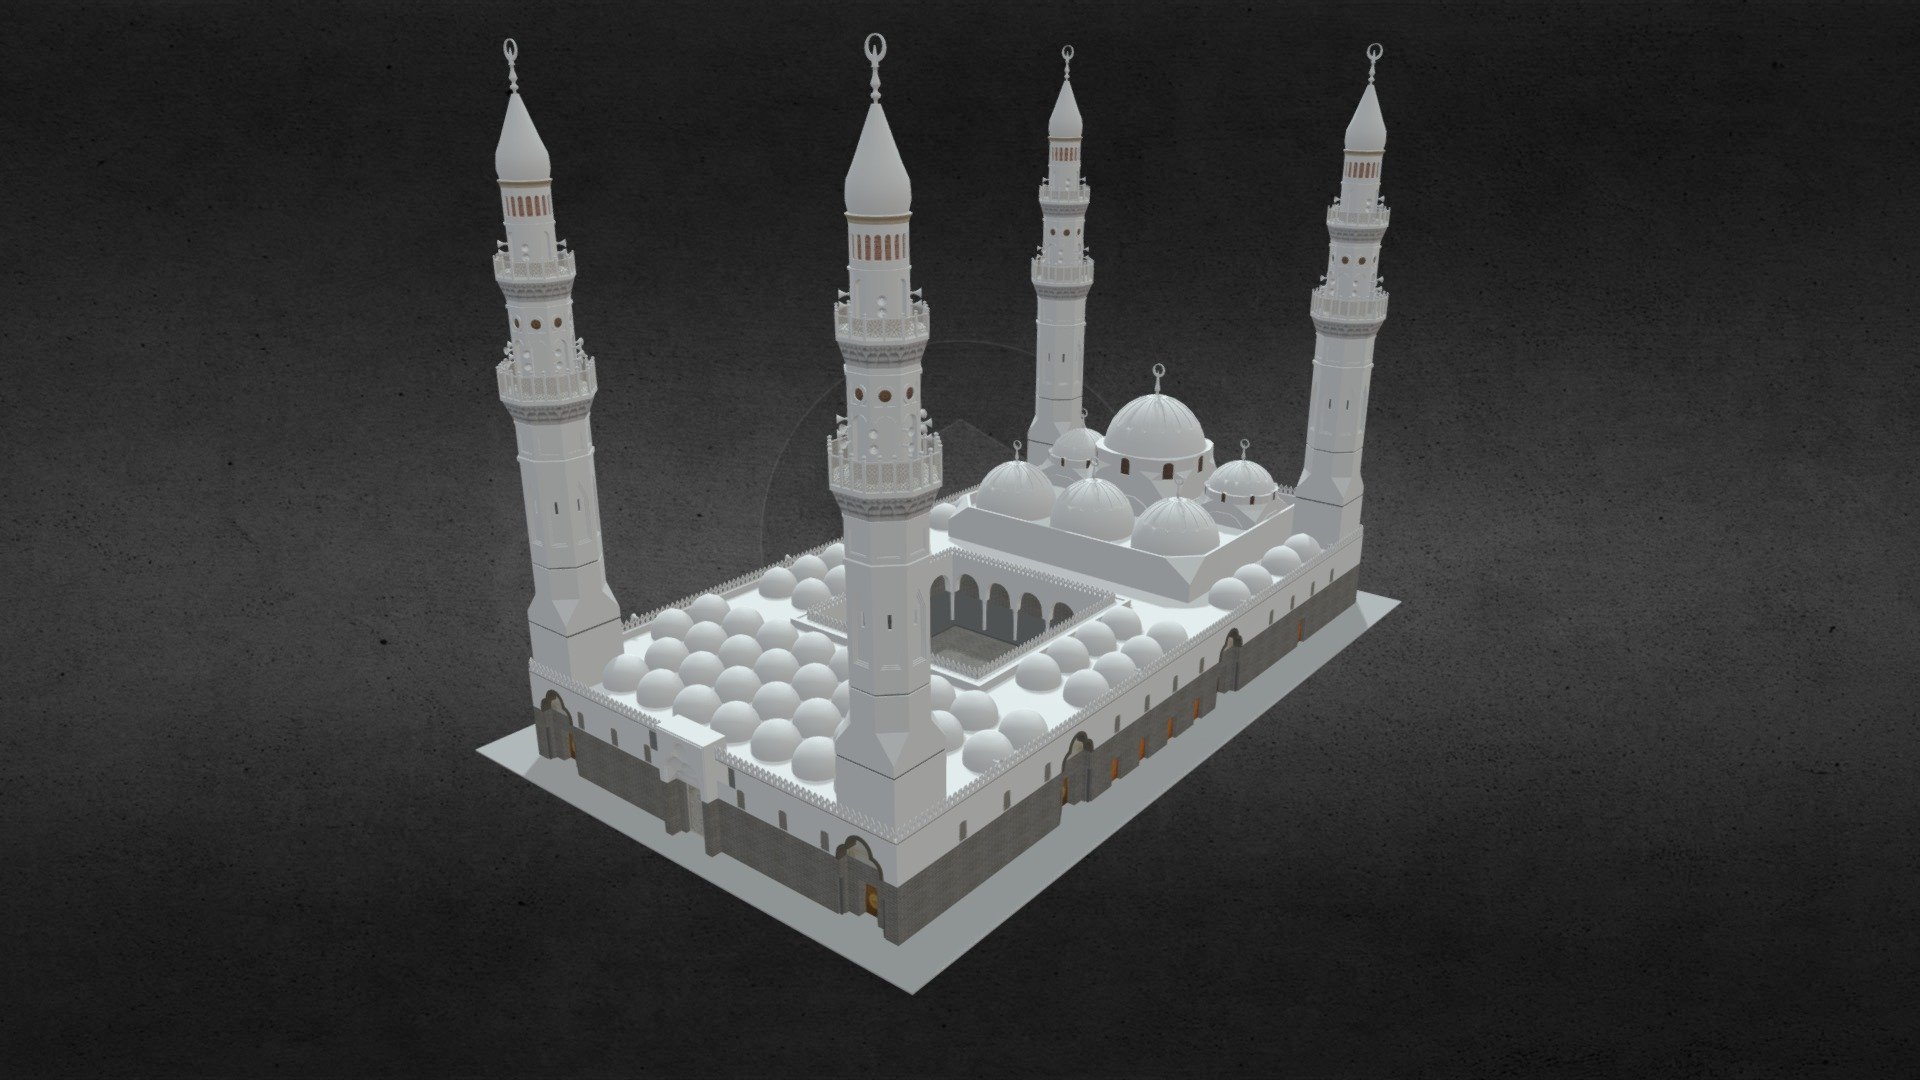 Quba Mosque Saudi Arabia 3D Model
Originally created with 3ds Max 2015 and rendered in Mental Ray.

Quba Mosque Saudi Arabia 3D Model Total Poly Counts:
Poly Count = 83373
Vertex Count = 89694

Model is placed to 0,0,0 scene coordinates.
Every part of the model named properly.
The model is Full UVW &amp; unwrapped.
Include 2 cameras and 3 light

https://nuralam3d.blogspot.com/2019/05/quba-mosque-saudi-arabia-3d-model.html - Quba Mosque Saudi Arabia 3D Model - 3D model by nuralam018 3d model